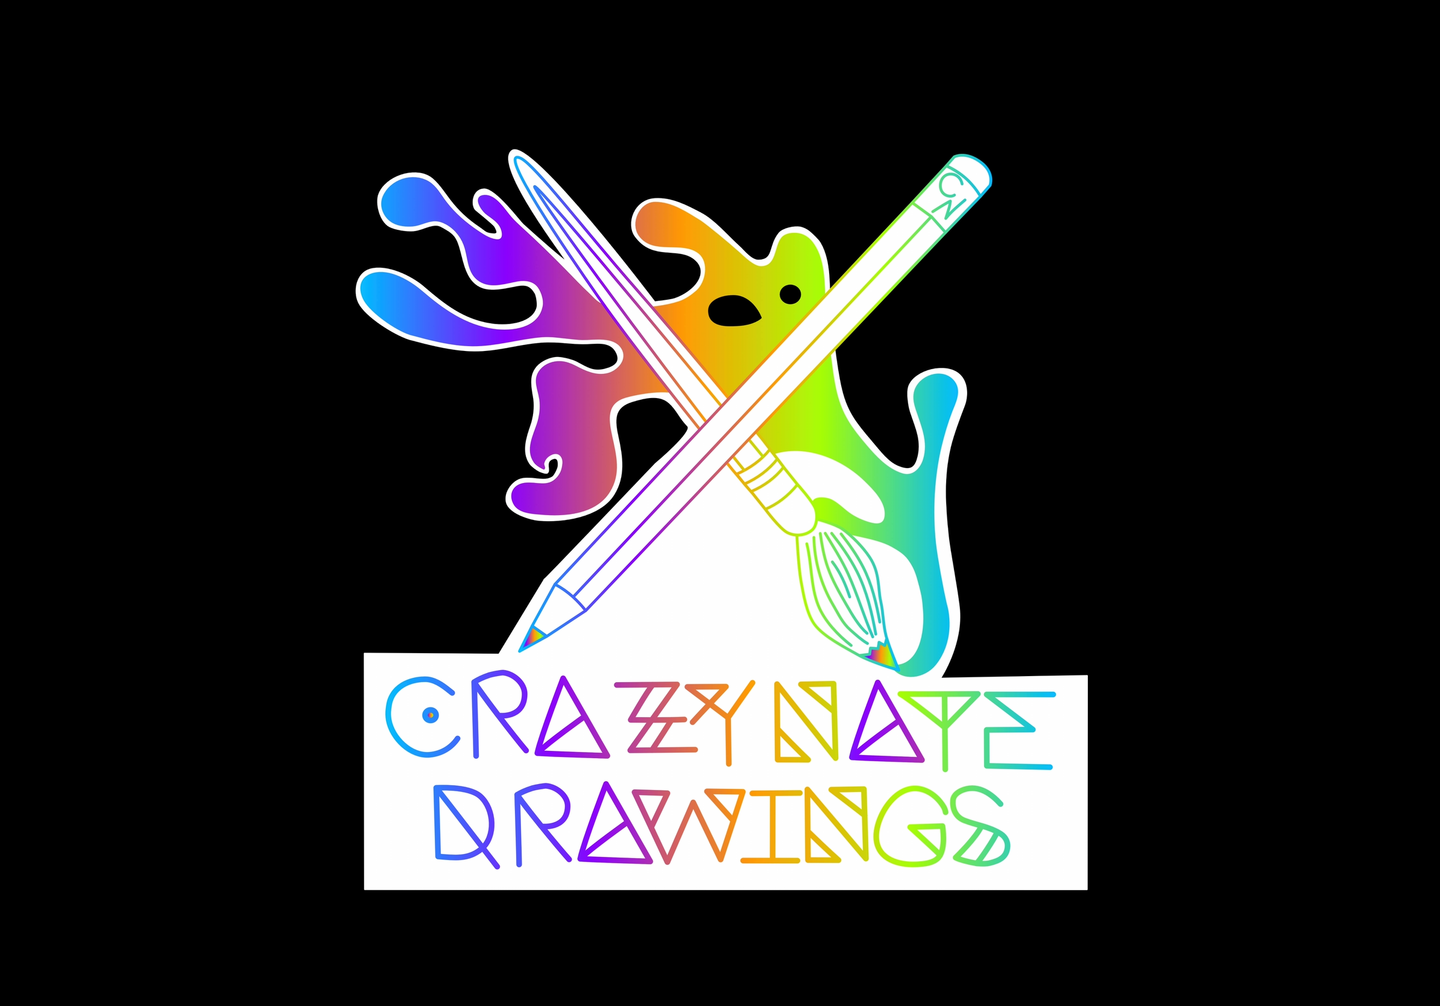 Crazy Nate Drawings